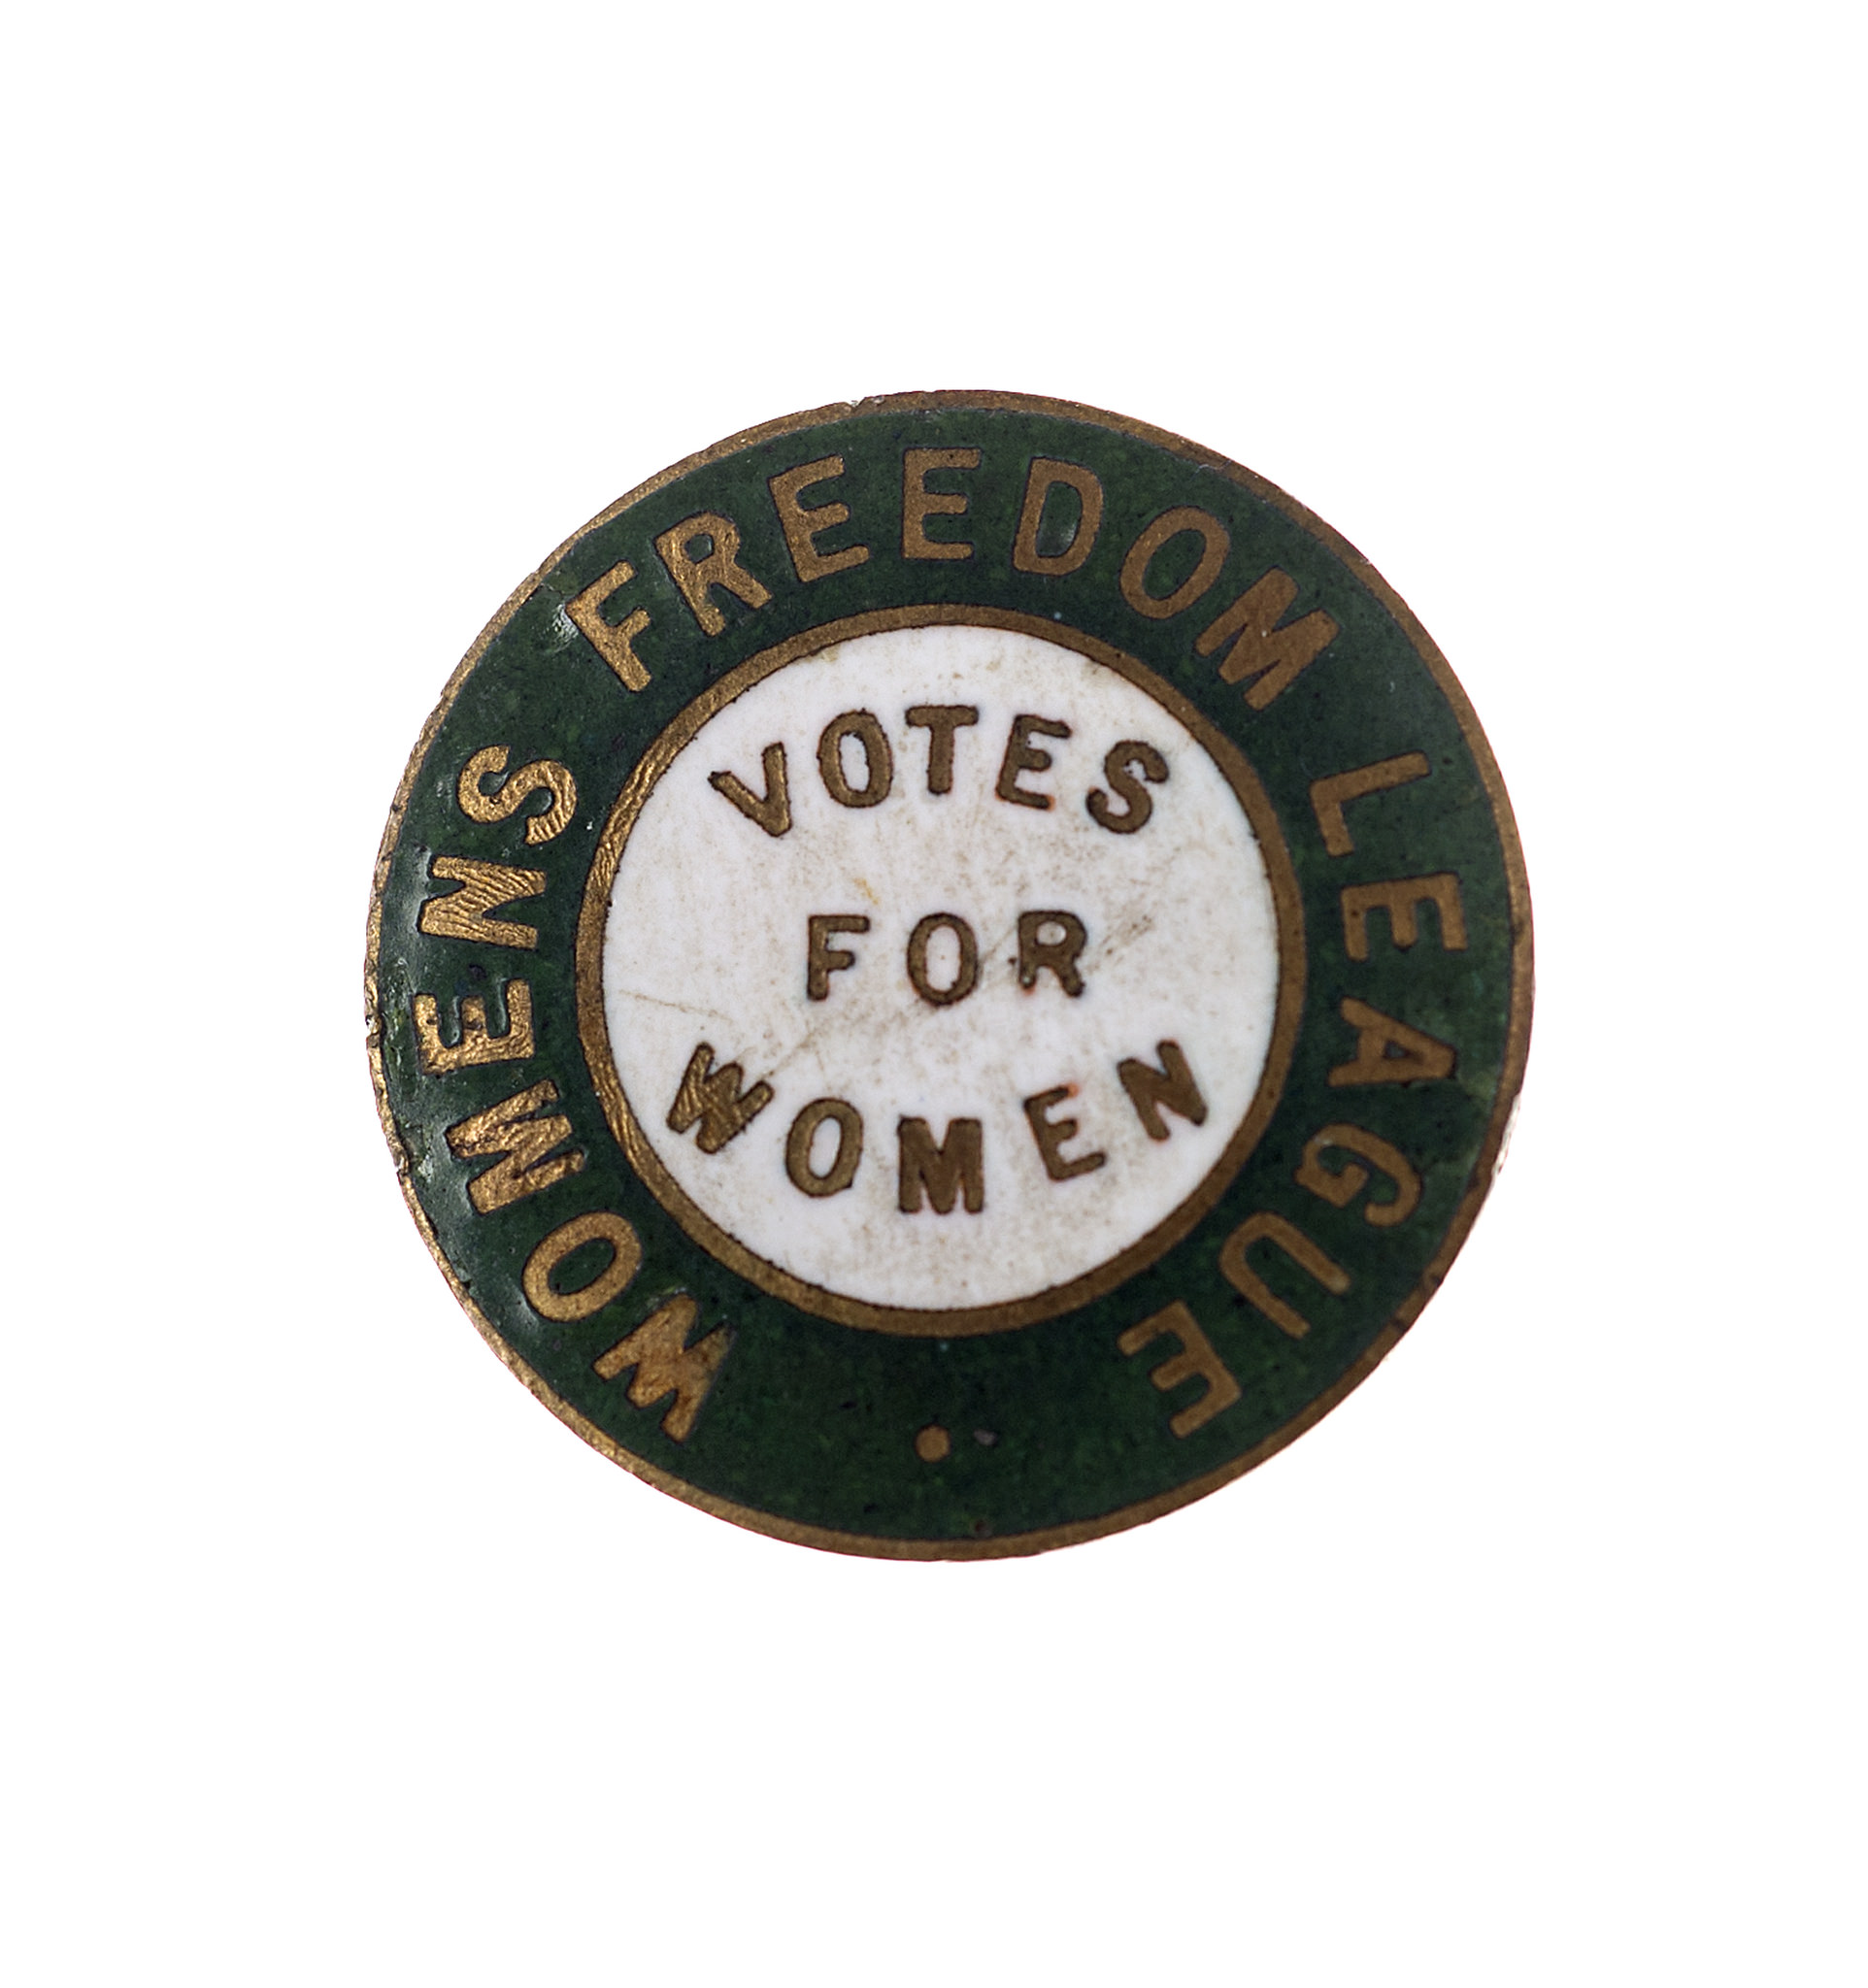 Image of a Women’s Freedom league badge. Around the edge are the words ‘Womens Freedom League’ and in the centre, the words ‘Votes for Women’.